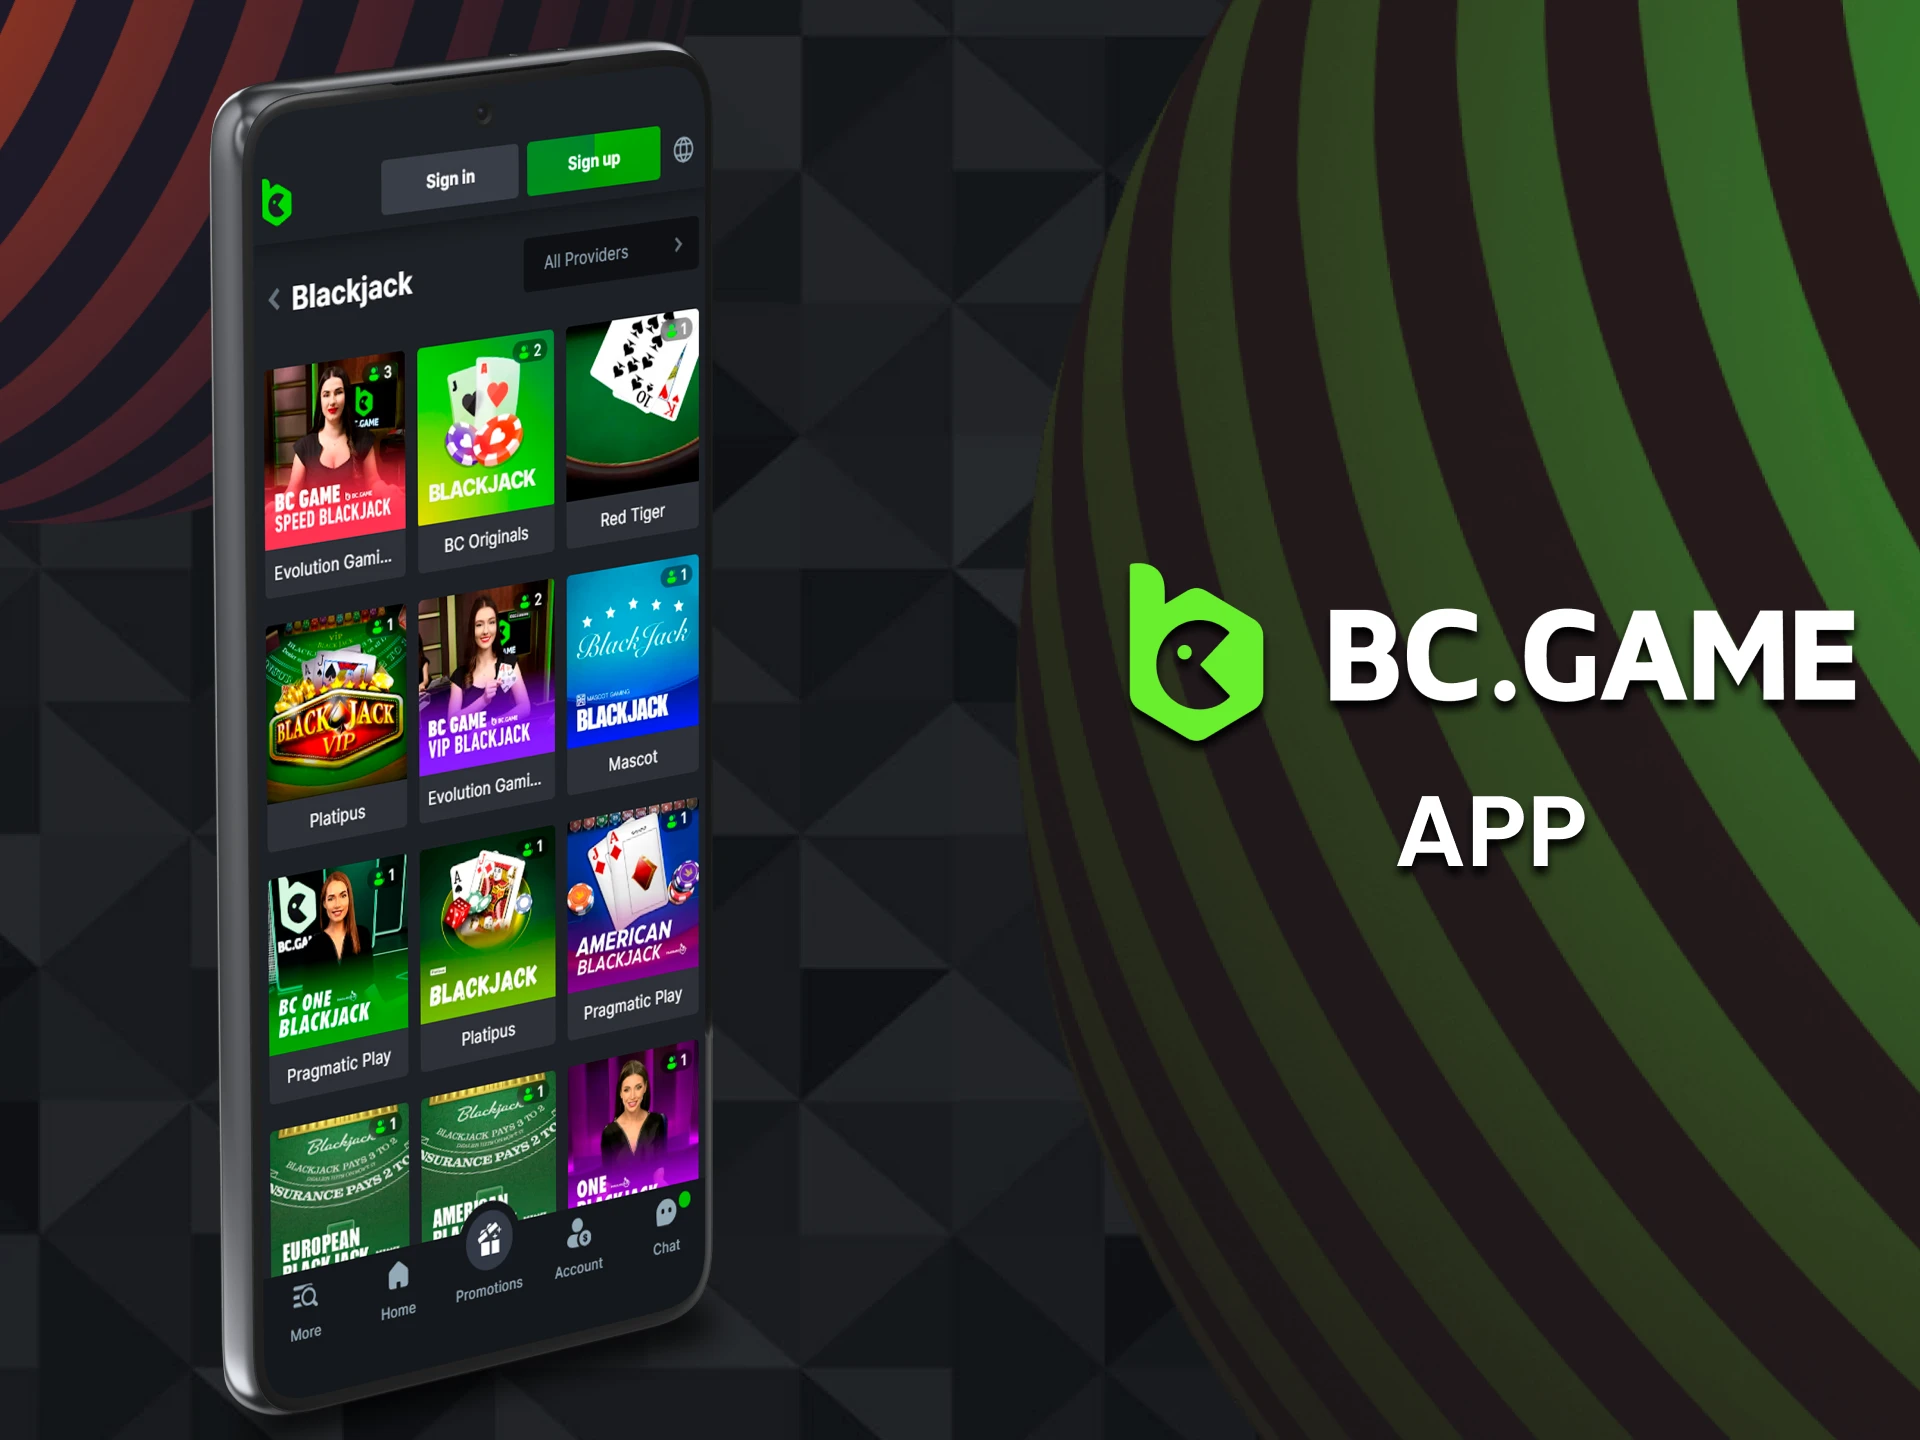 You can play BC Game blackjack through the application for Android and iOS.